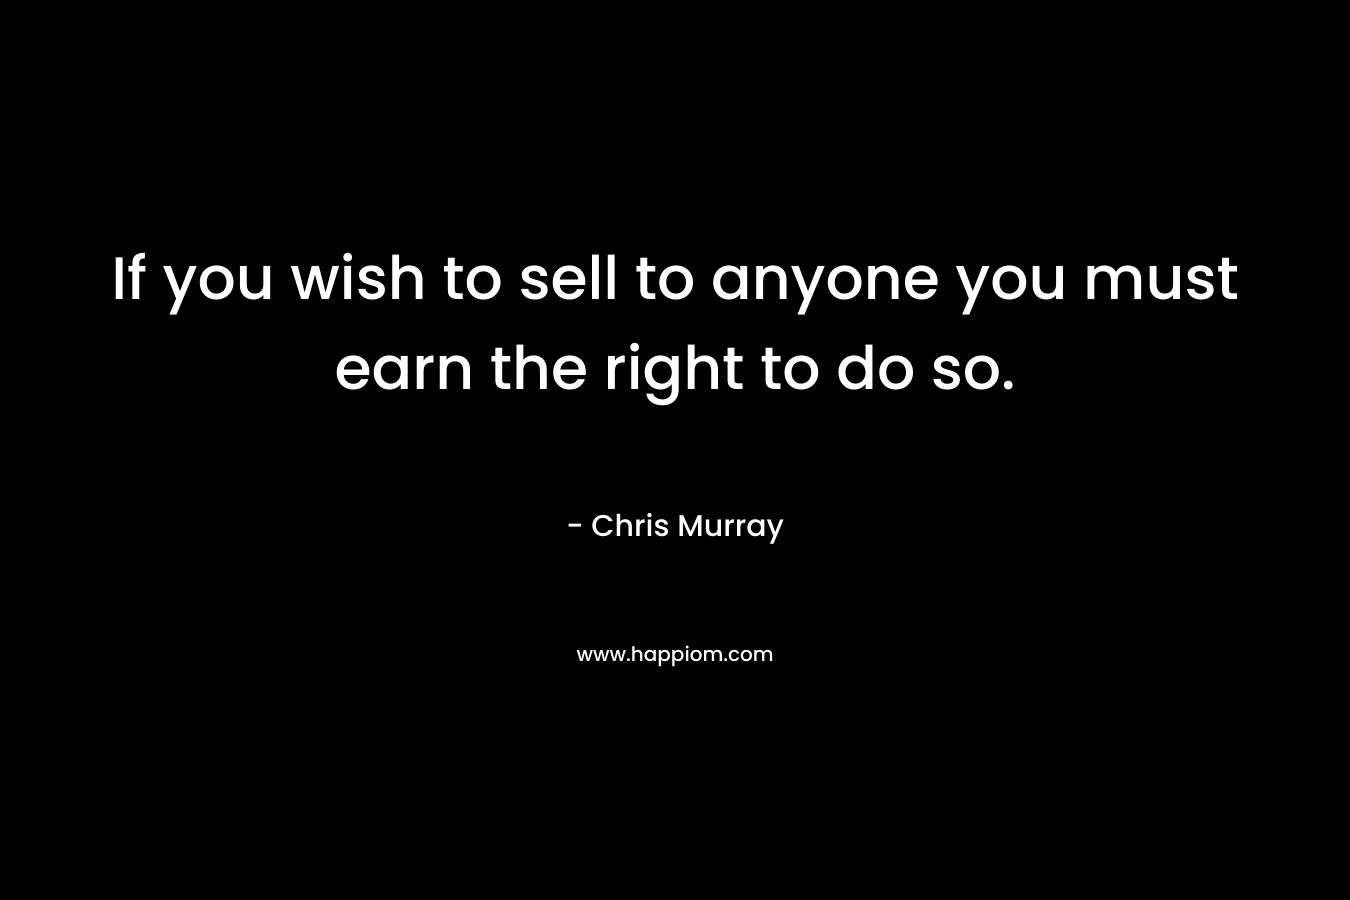 If you wish to sell to anyone you must earn the right to do so.